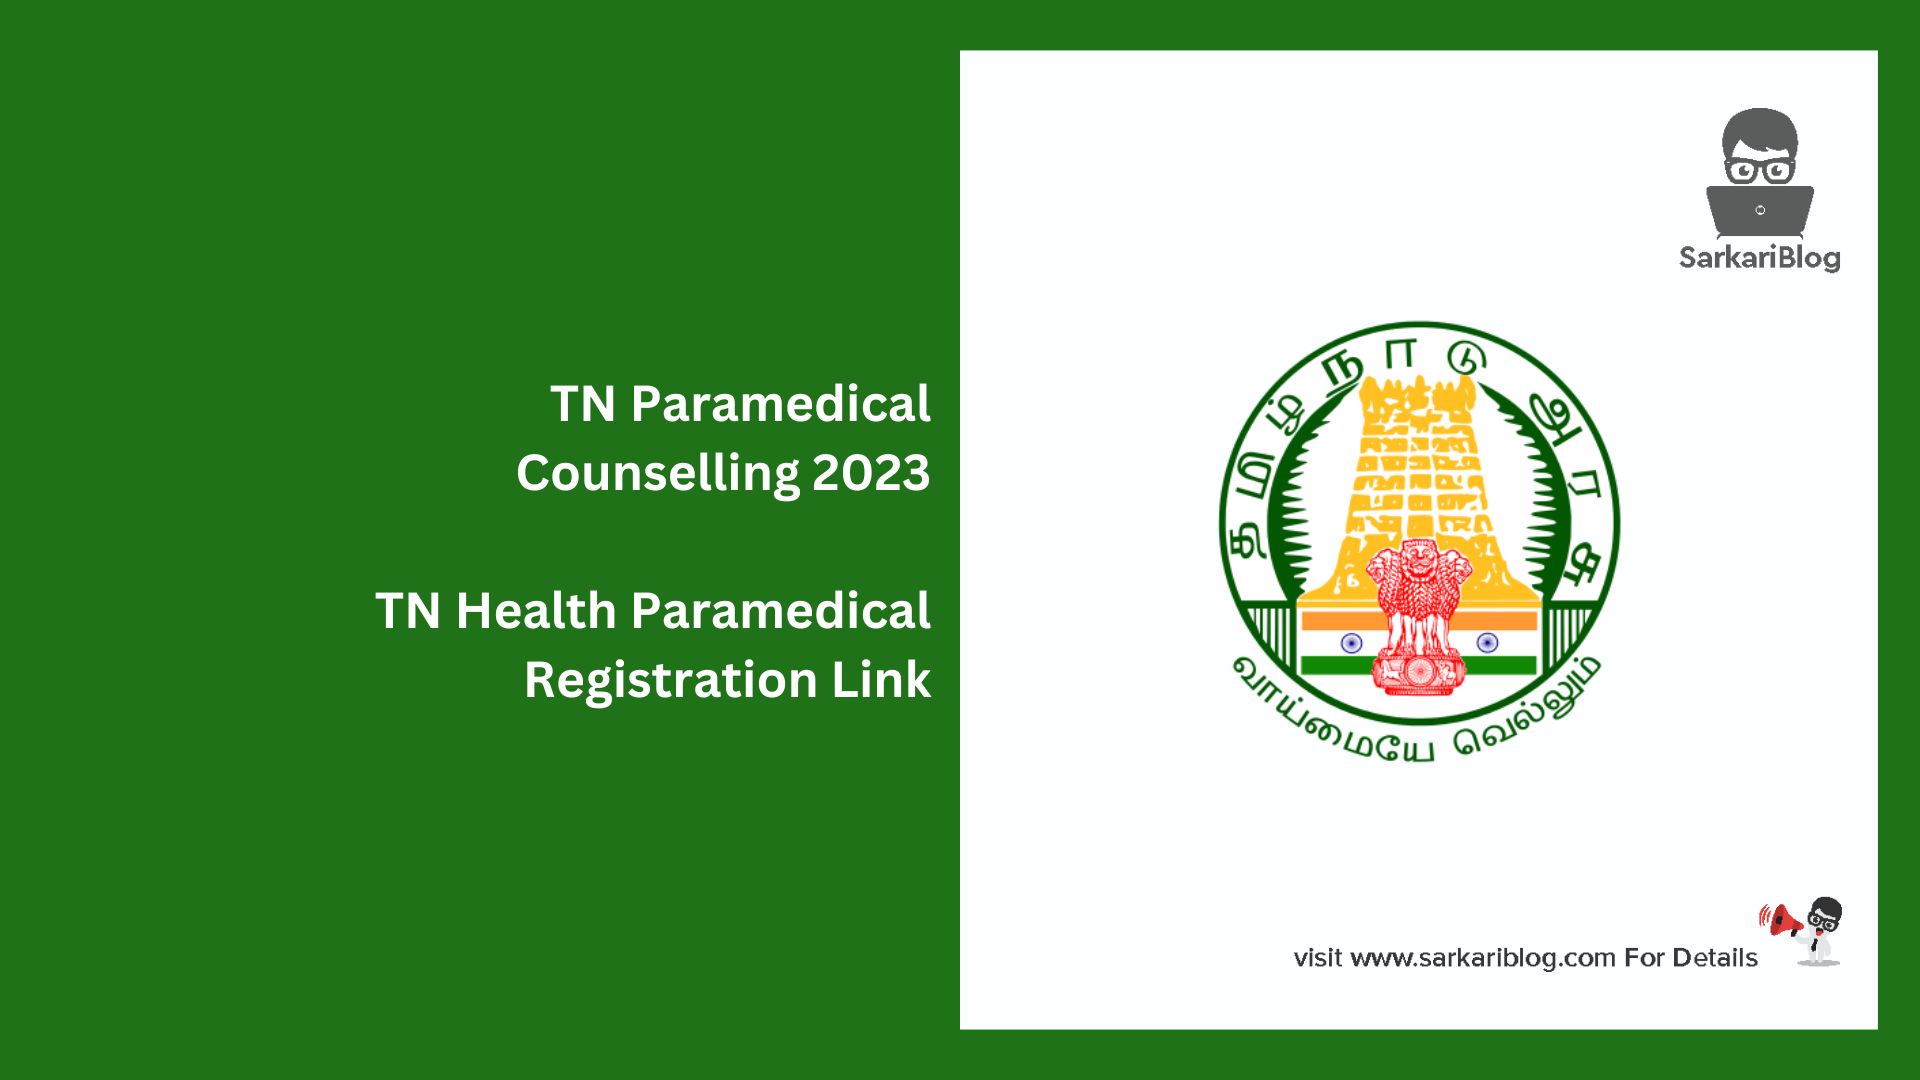 TN Paramedical Counselling 2023